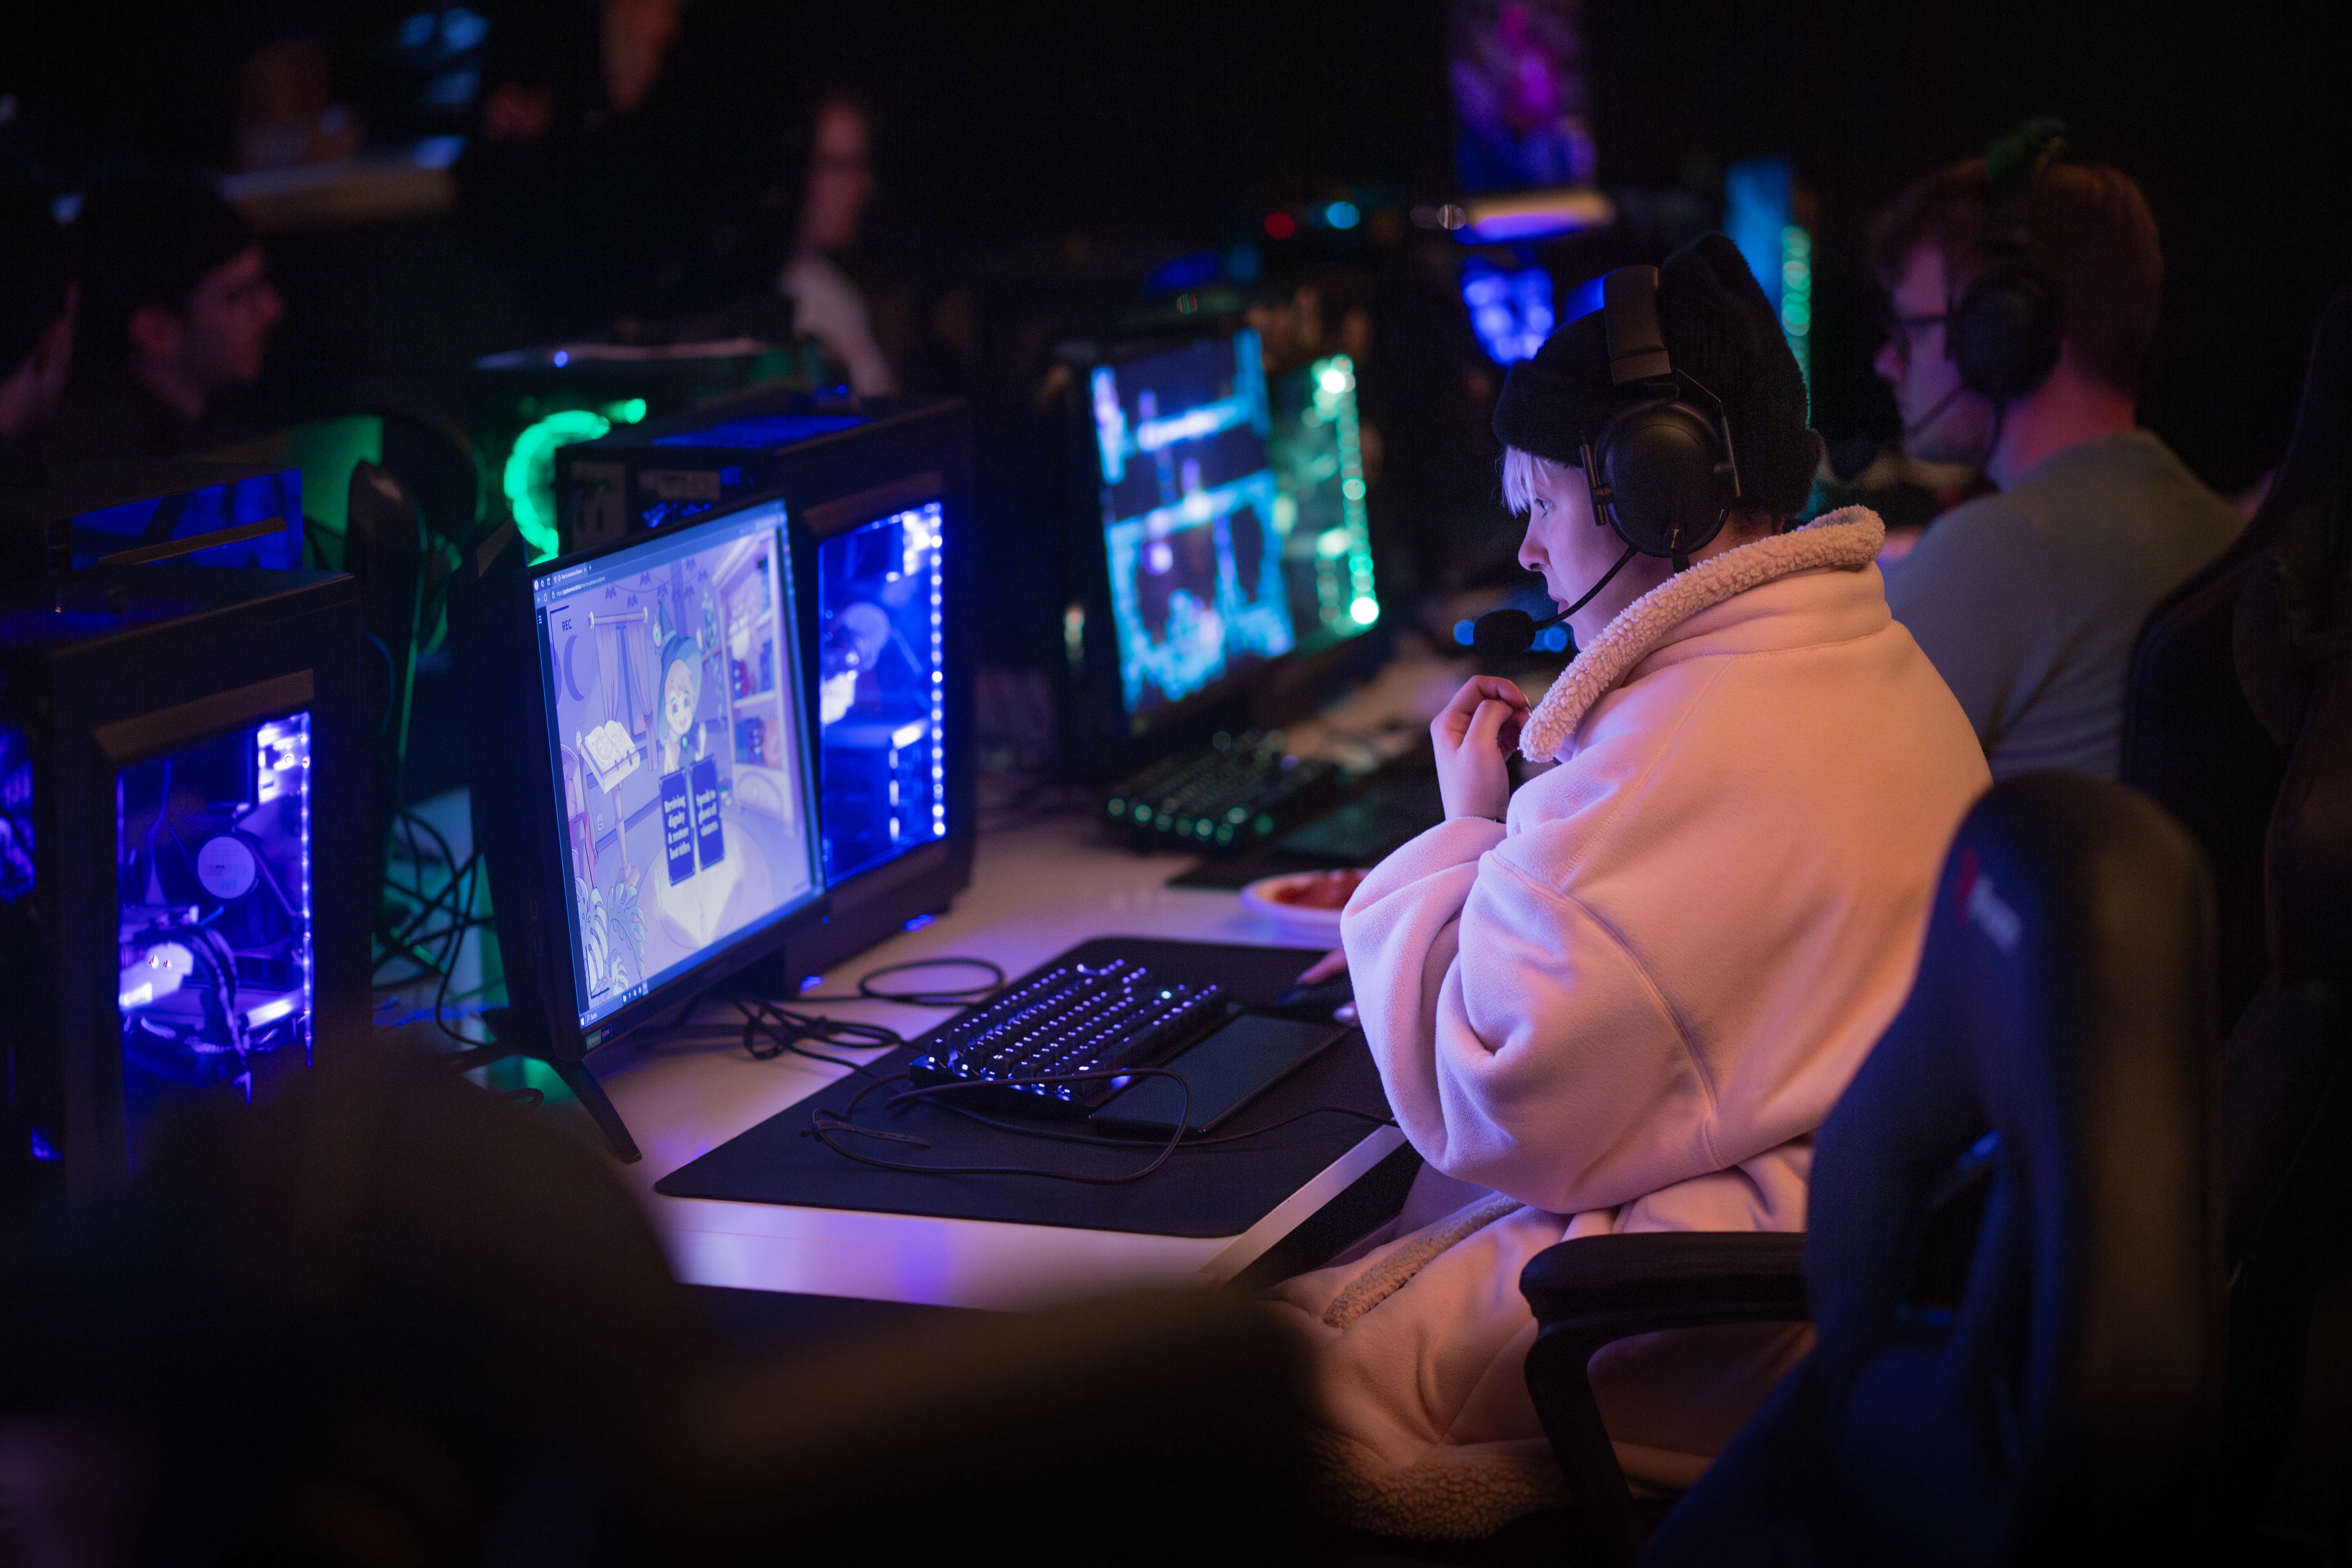 The professional gaming equipment provided perfect immersion even in a crowded room.